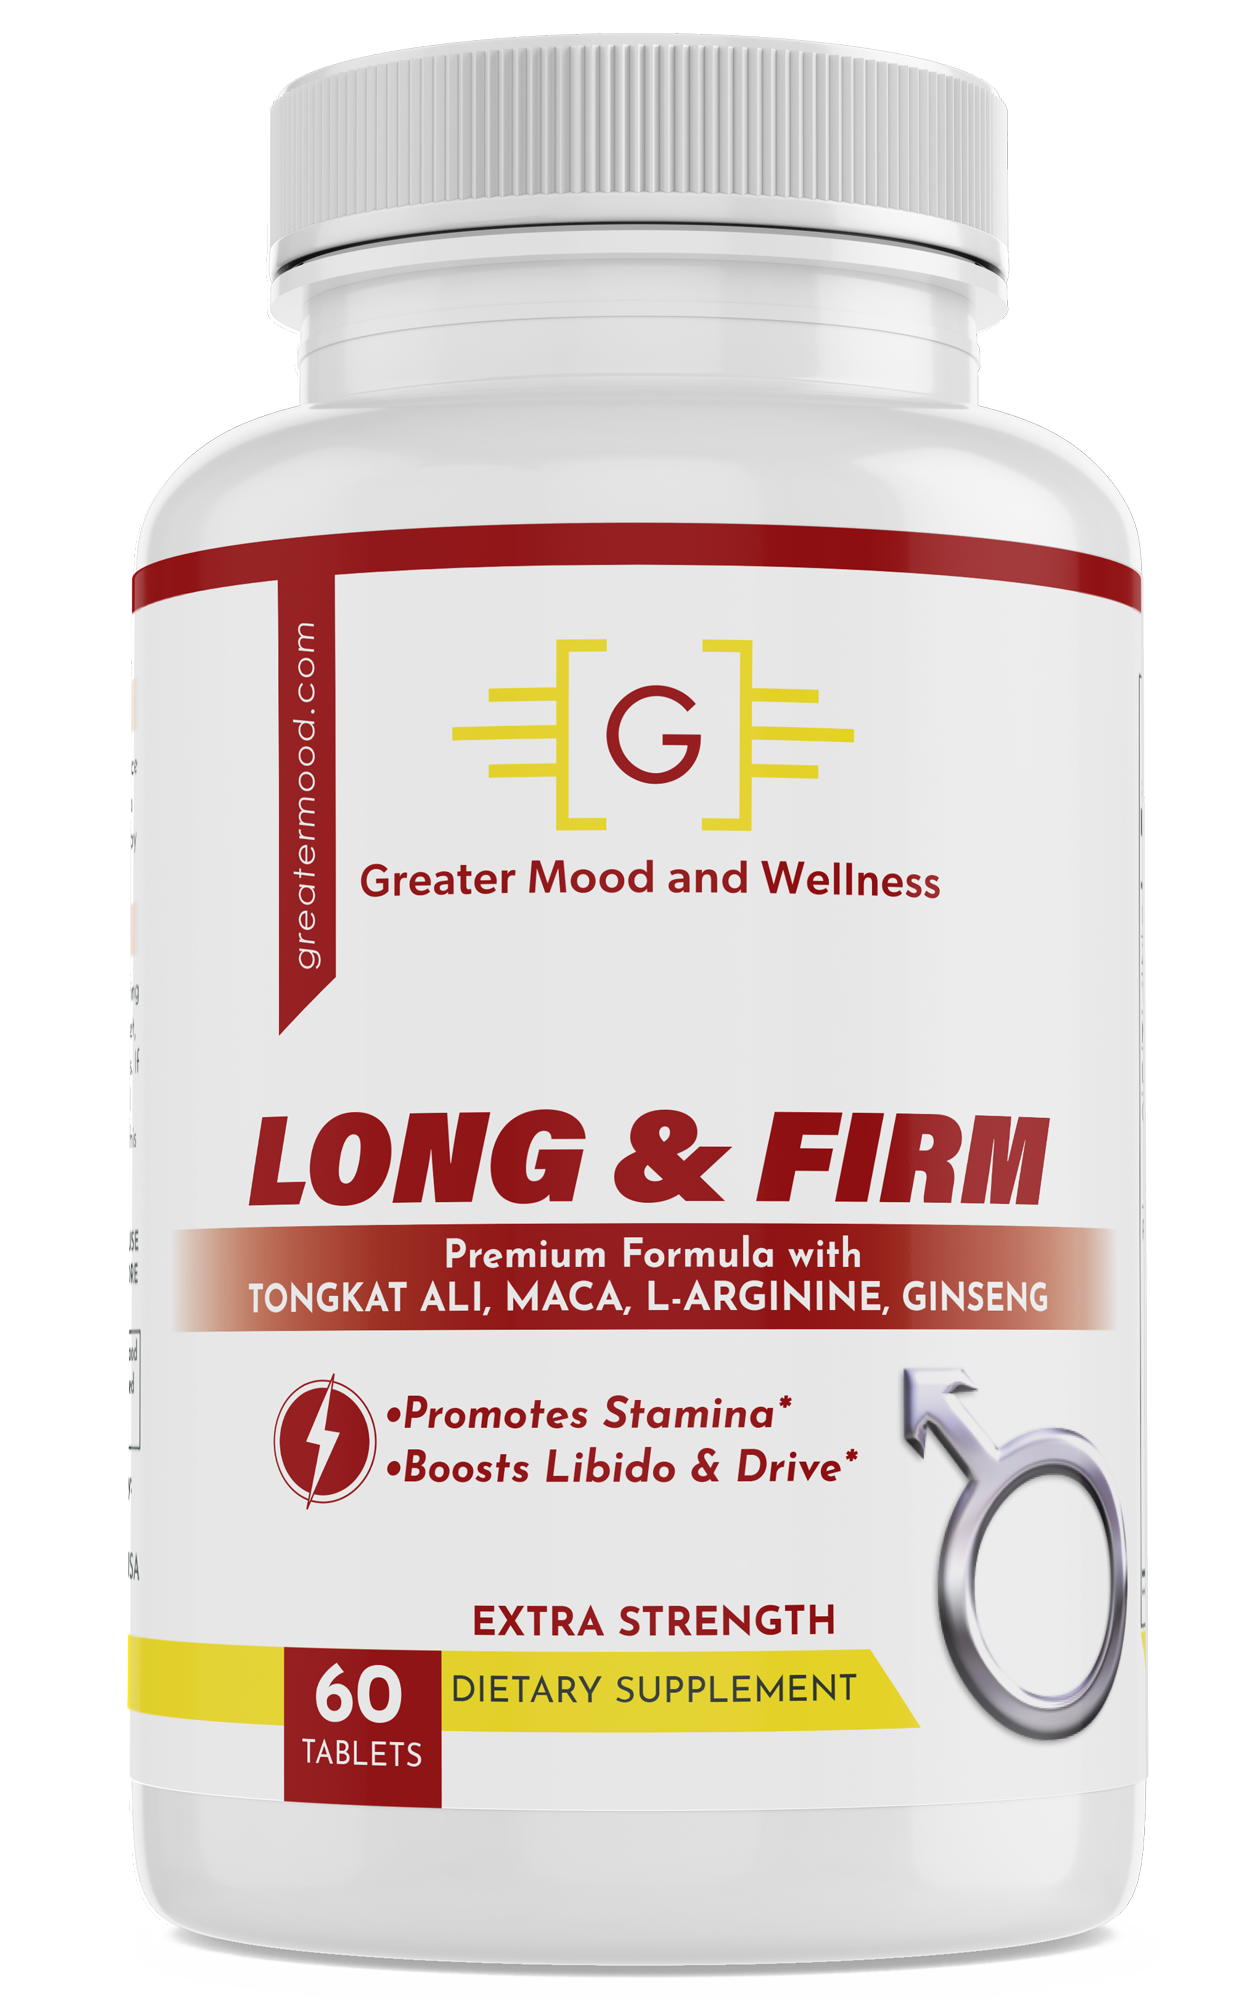 Long & Firm - Libido and Stamina Capsules-How to Increase Your Stamina in Bed Naturally